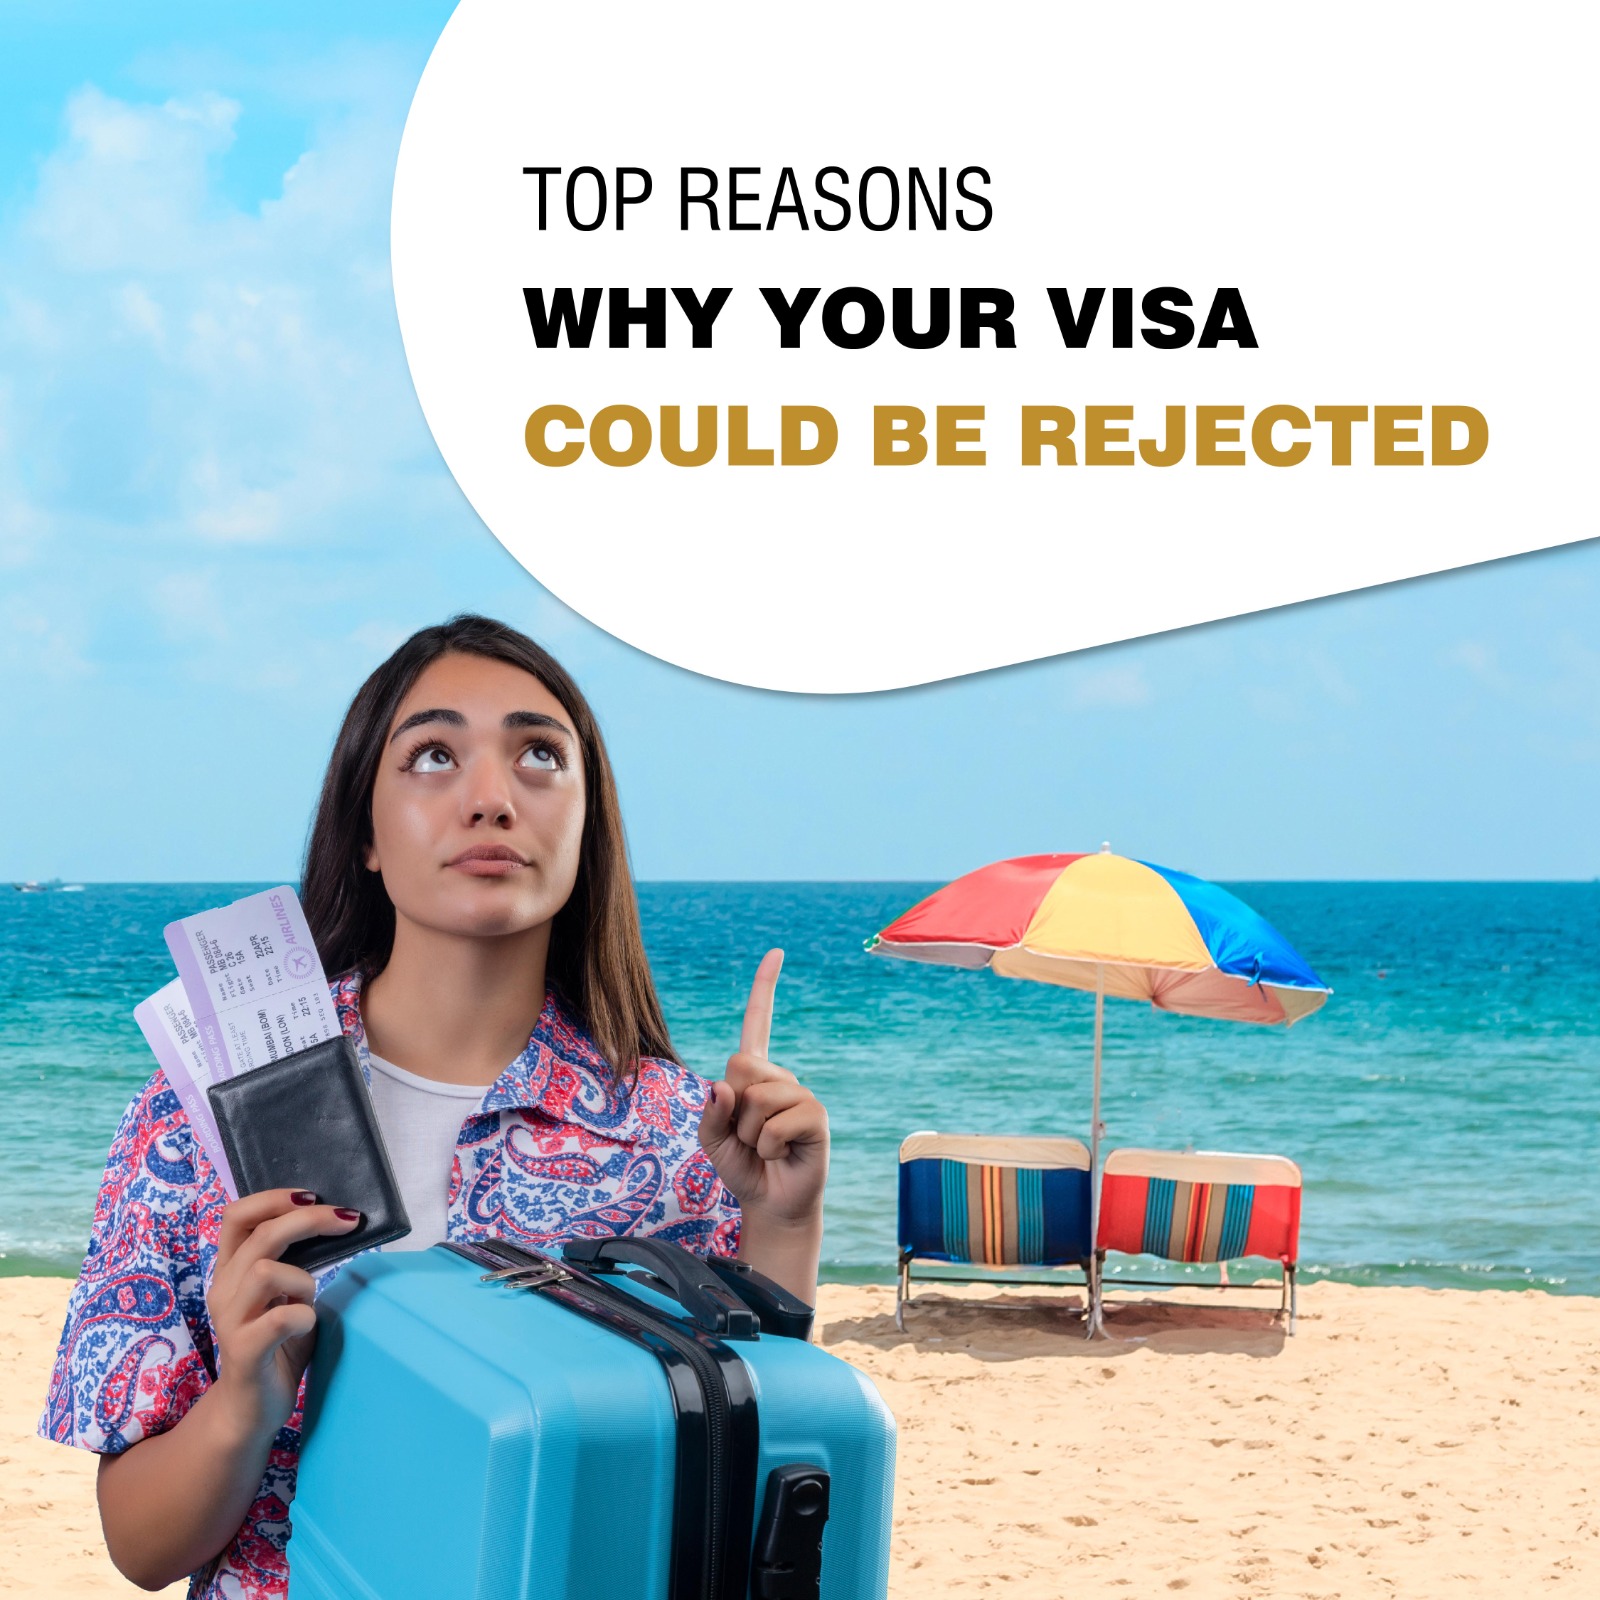 Top reasons why your visa could be rejected